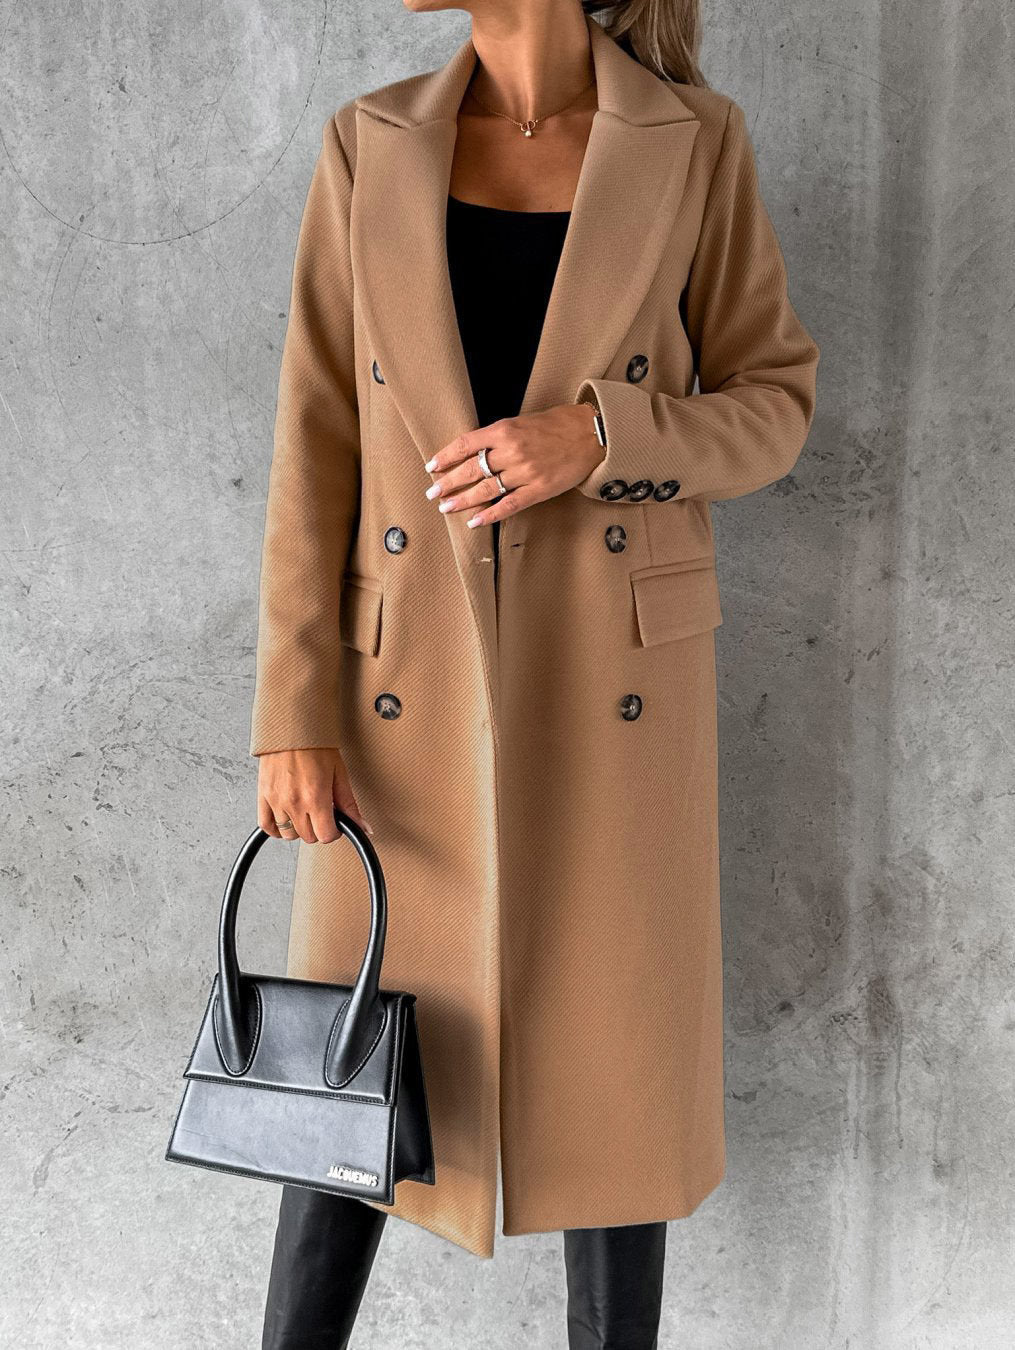 Autumn Winter Women Clothing Long Sleeve Polo Collar Solid Color Double Breasted Slim Coat Woolen Coat